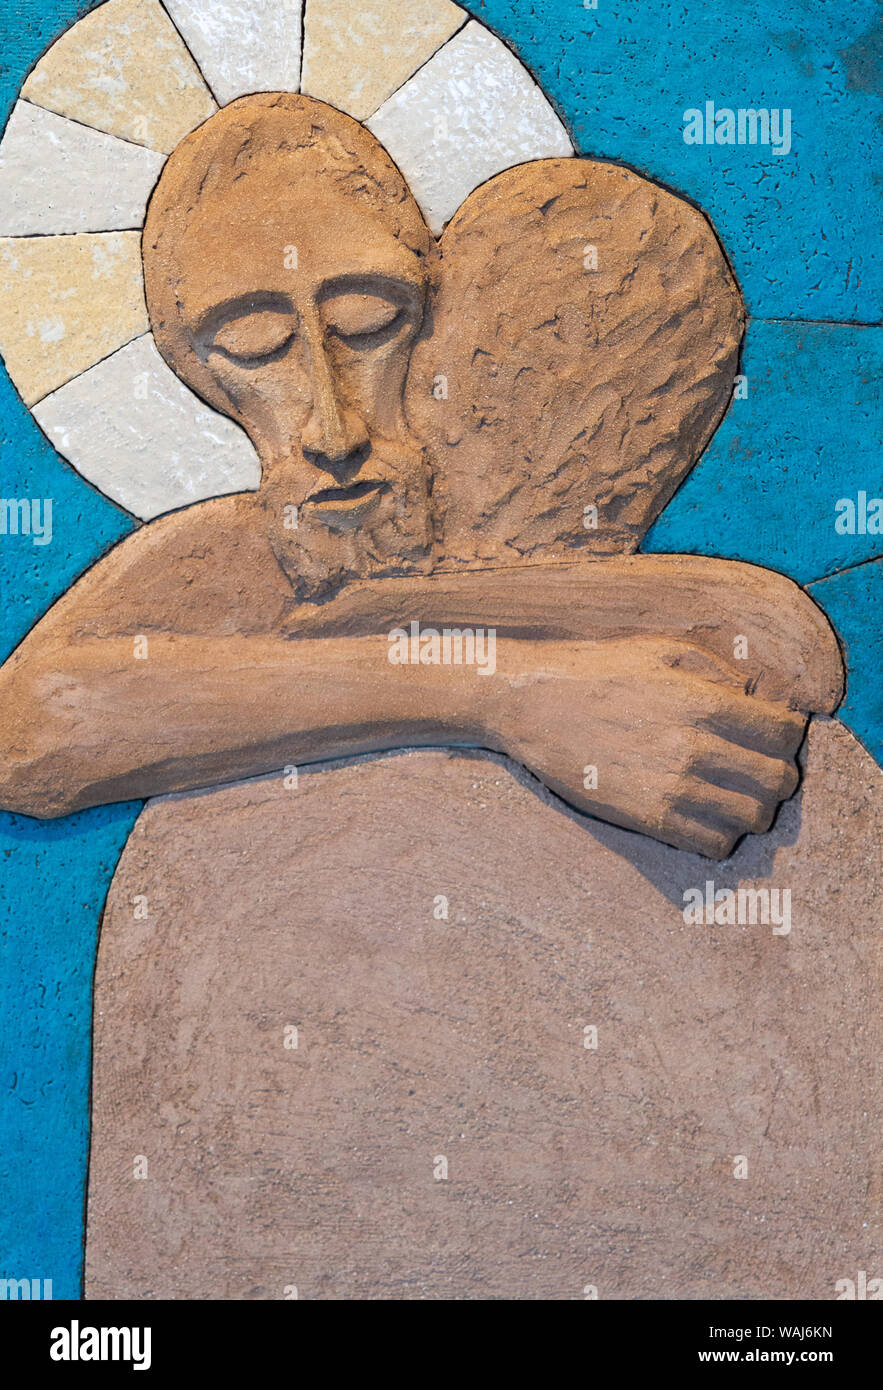 A relief sculpture of Jesus Christ embracing a person. Made out of modelling clay by Lubo Michalko. Displayed in the Quo Vadis Catholic House. Stock Photo